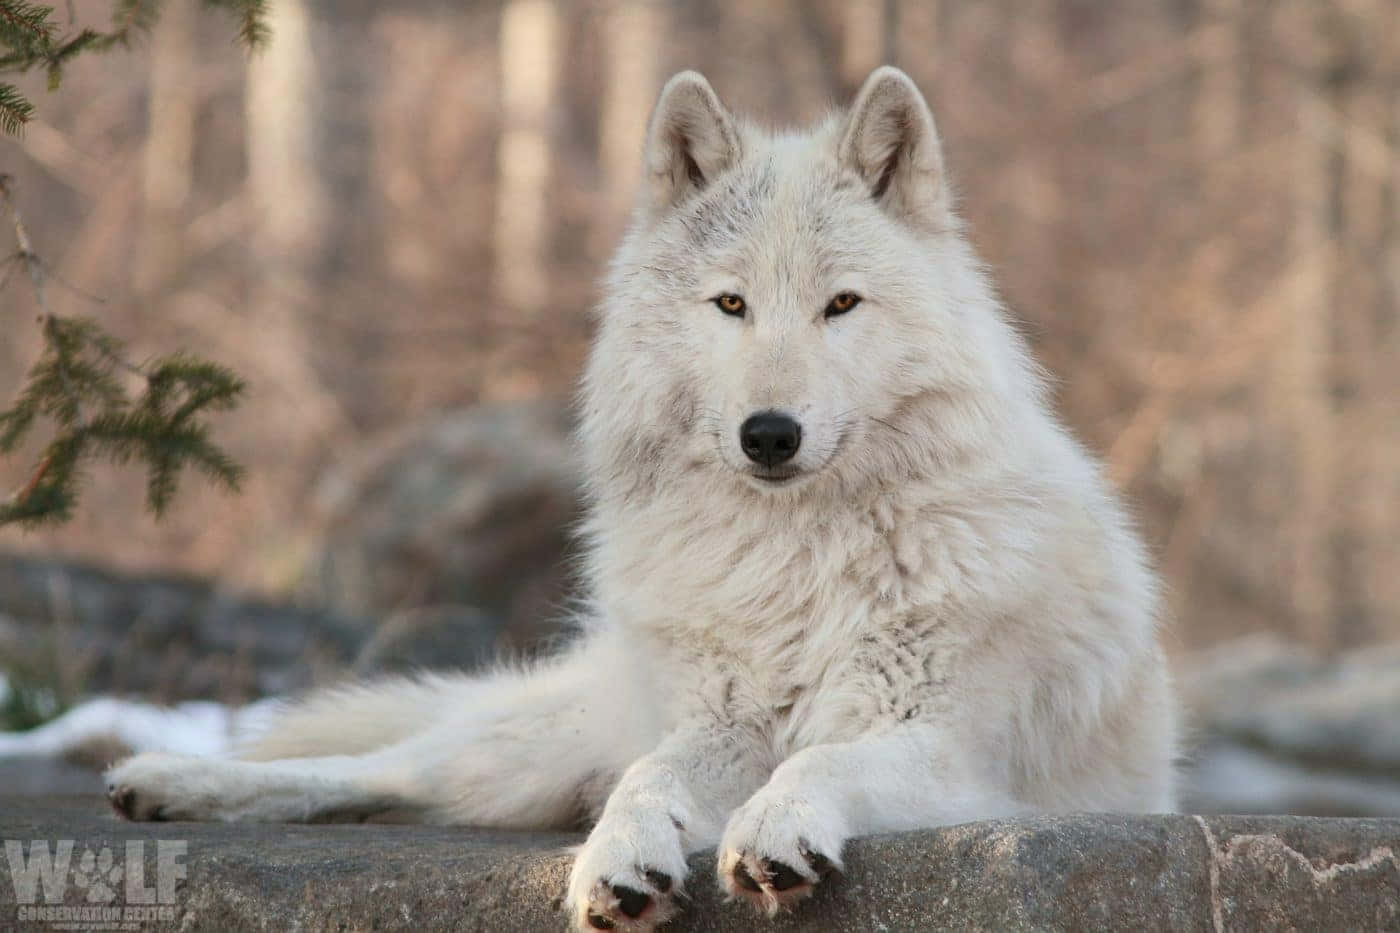 "The beautiful wolf sits in the shadows, just waiting for its next adventure."